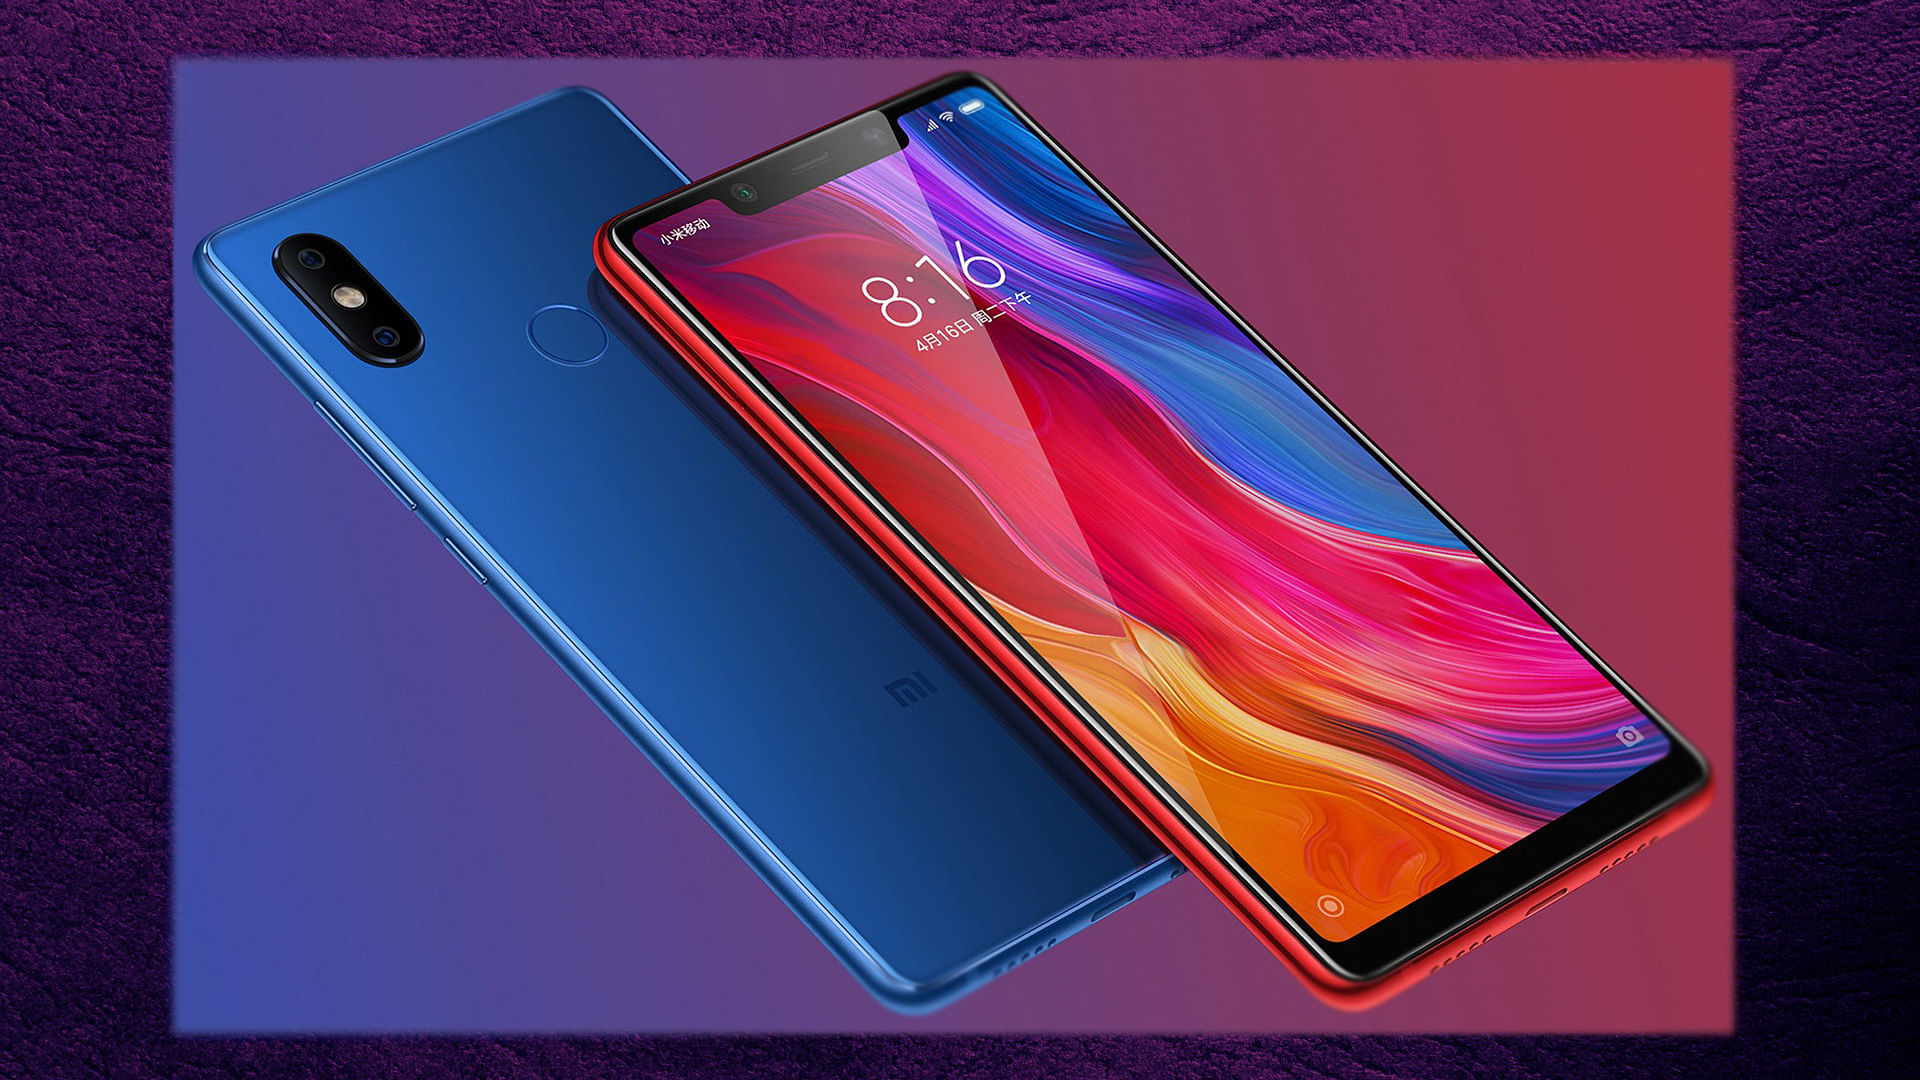 The Xiaomi Mi 8 comes with a OLED display